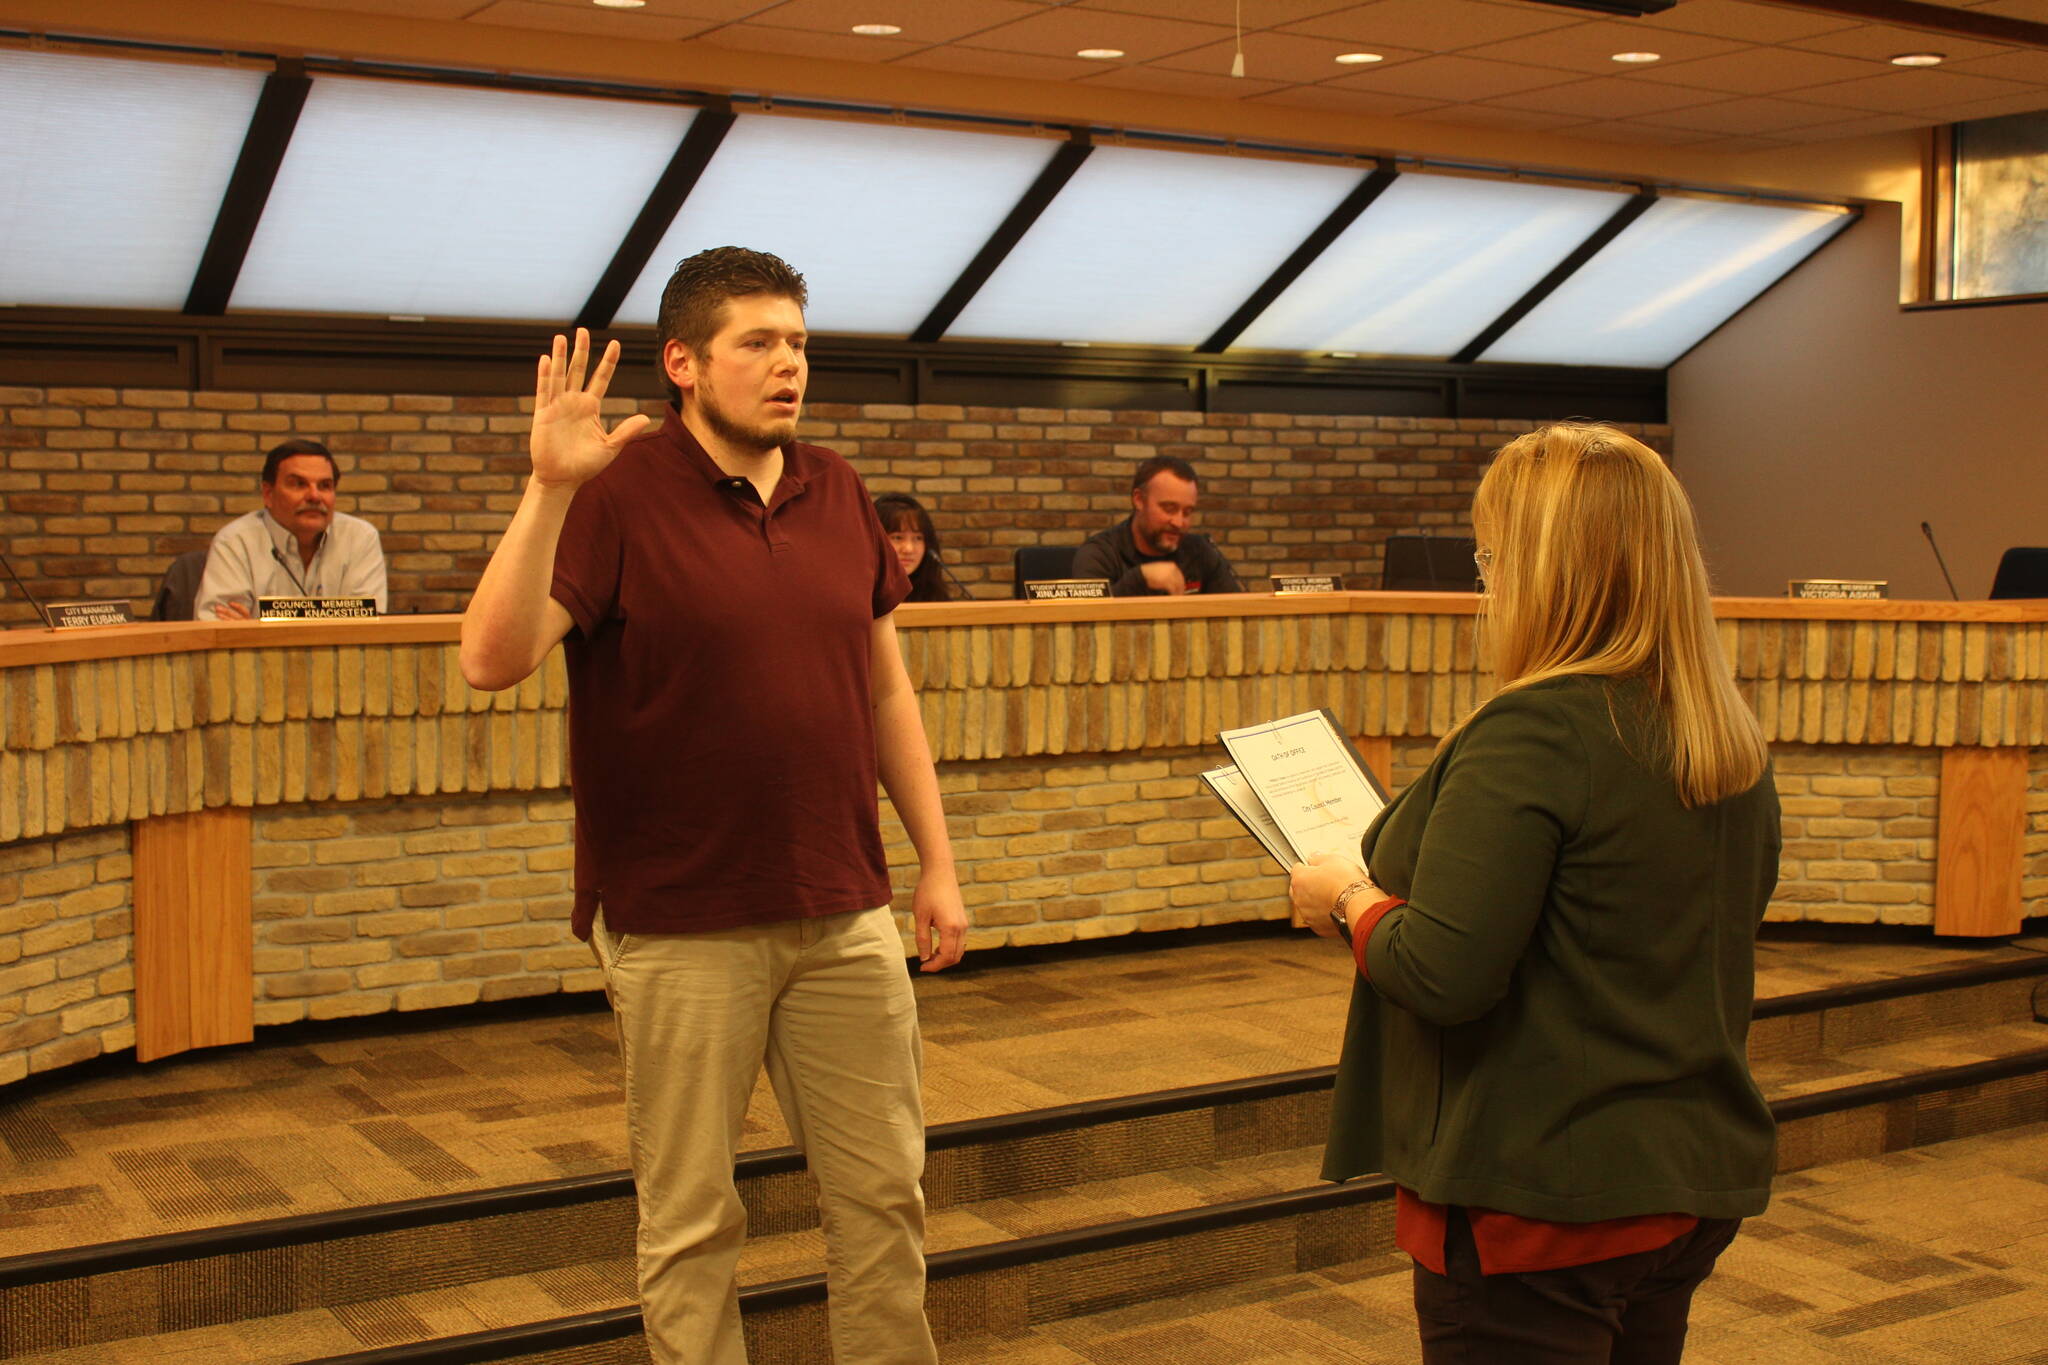 Kenai City Clerk Shellie Saner (right) administers an oath of office to Phillip Daniel during a Kenai City Council meeting on Thursday, Oct. 19, 2023 in Kenai, Alaska. Daniel was elected to the council during the Oct. 3 election. (Ashlyn O’Hara/Peninsula Clarion)